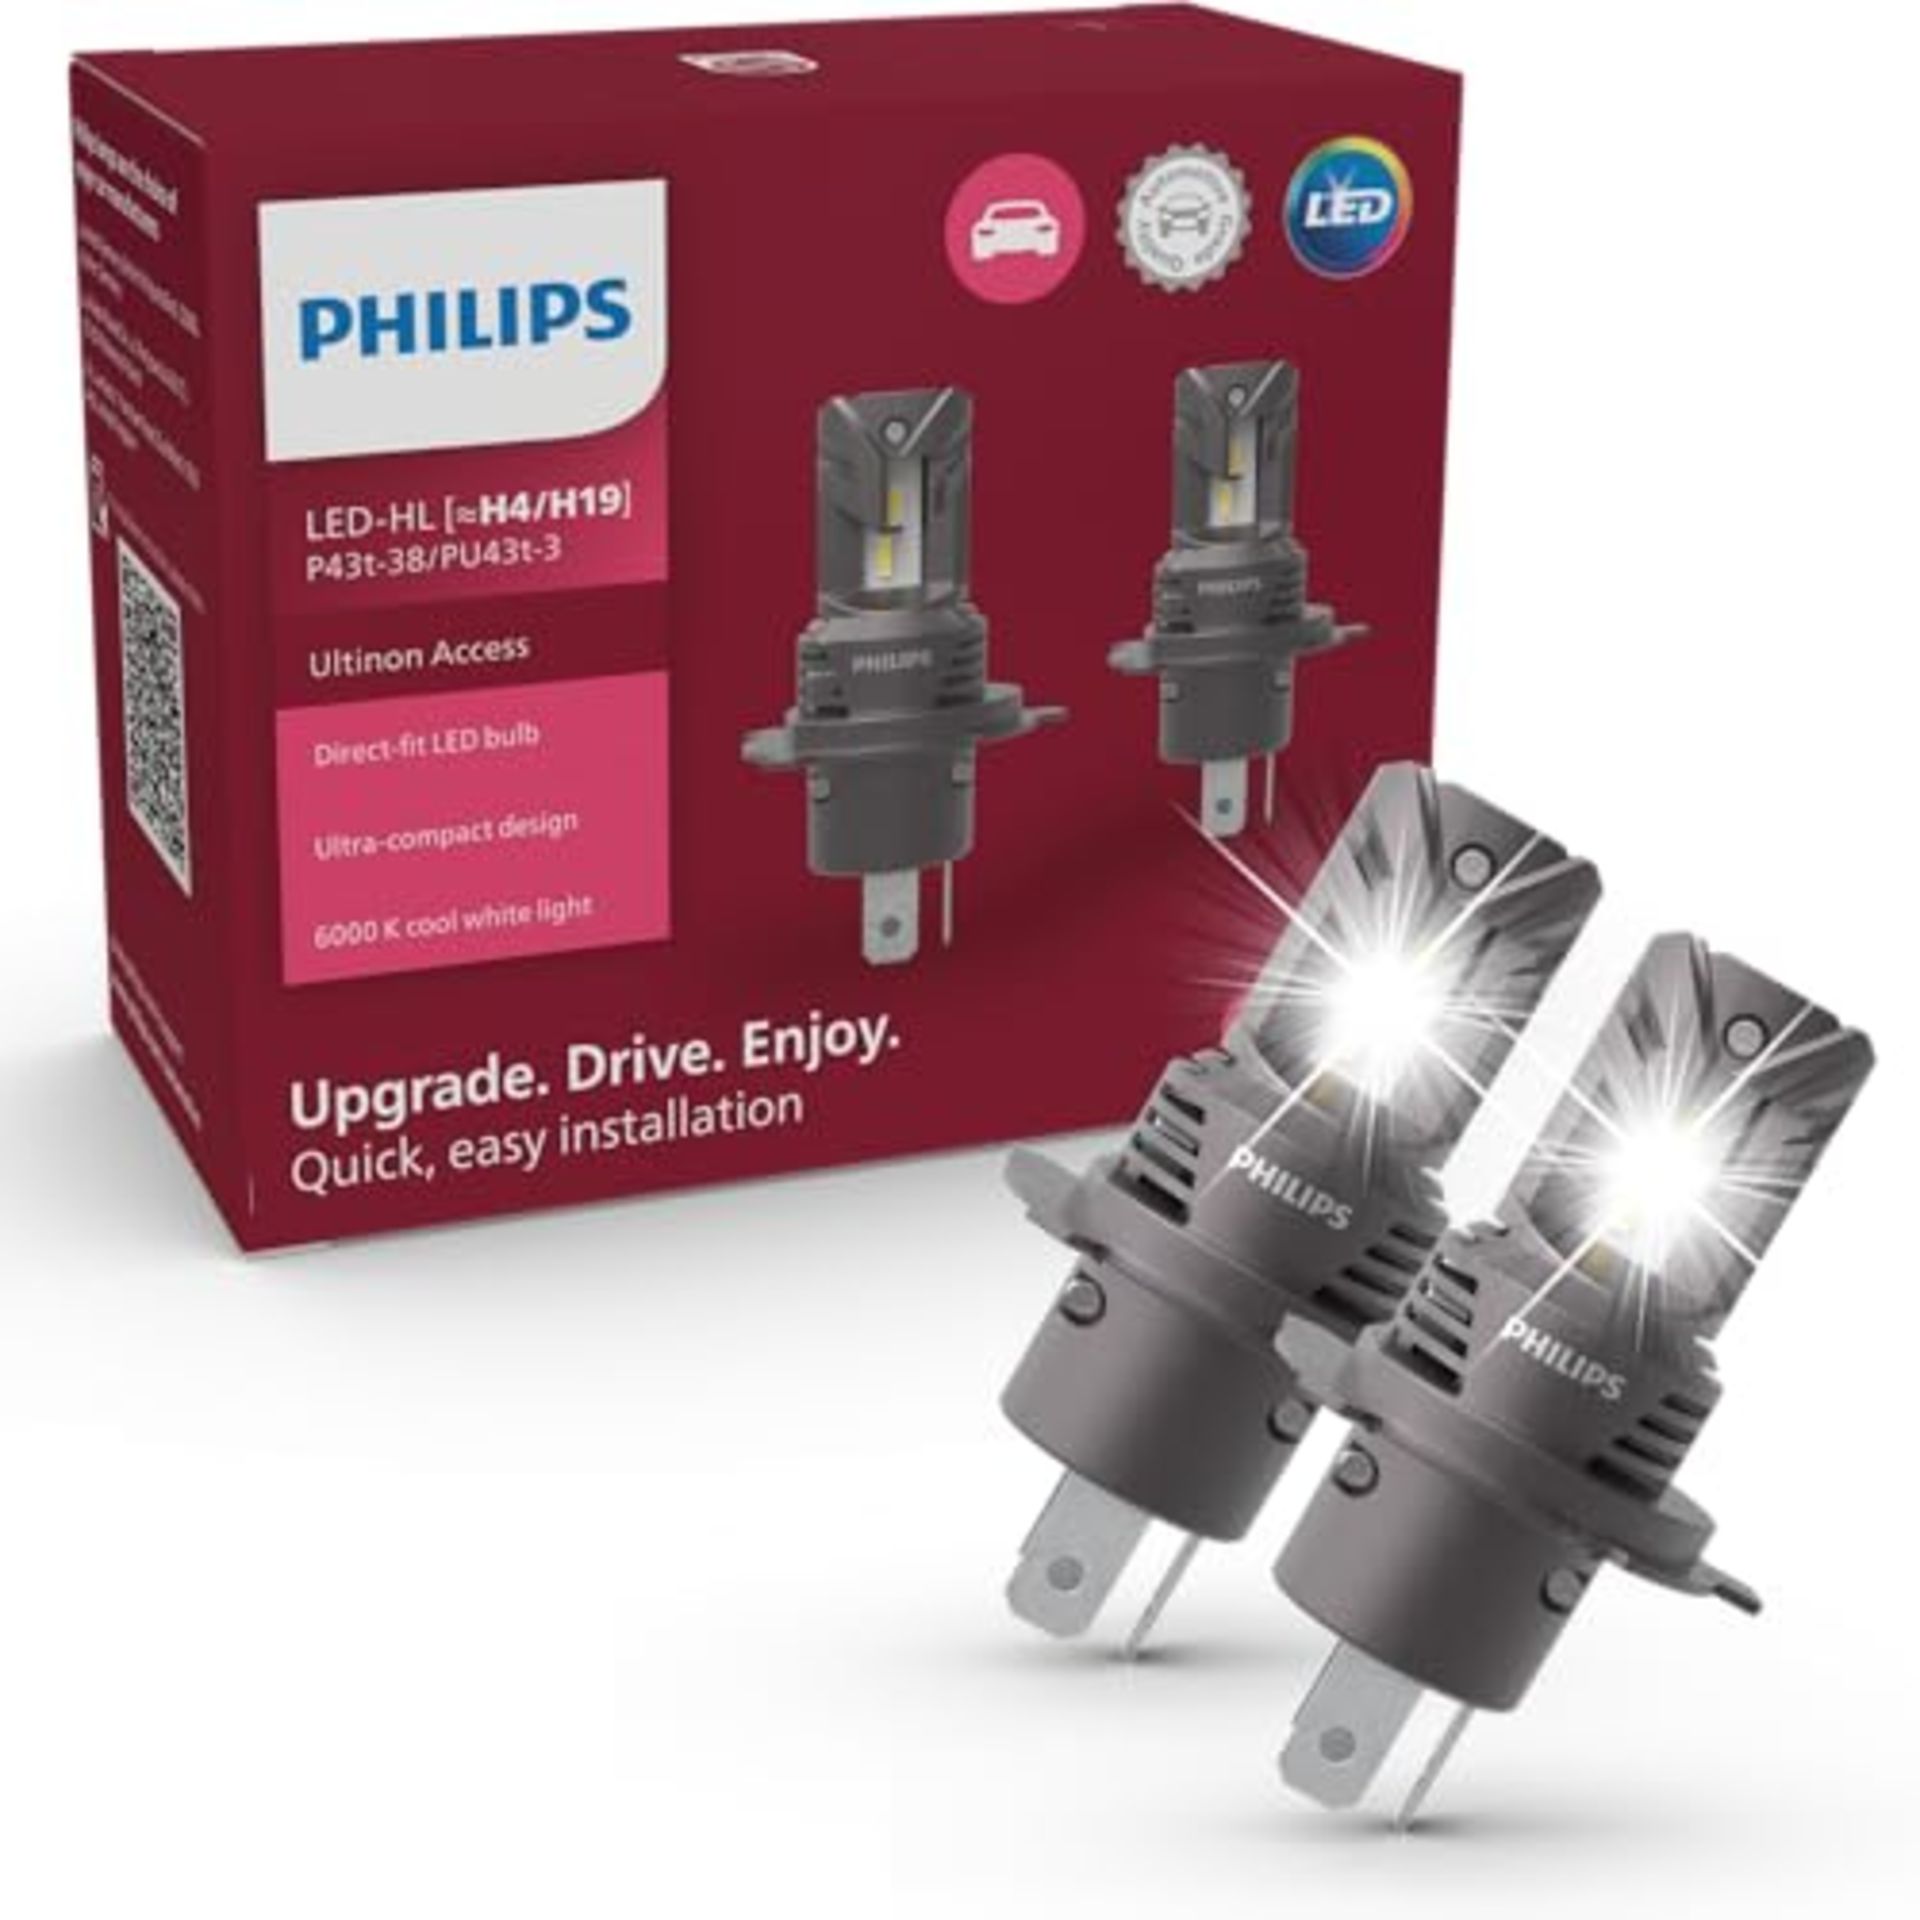 Philips Ultinon Access LED car headlight bulb (H4), ultra-compact direct-fit, 80%, 6.0